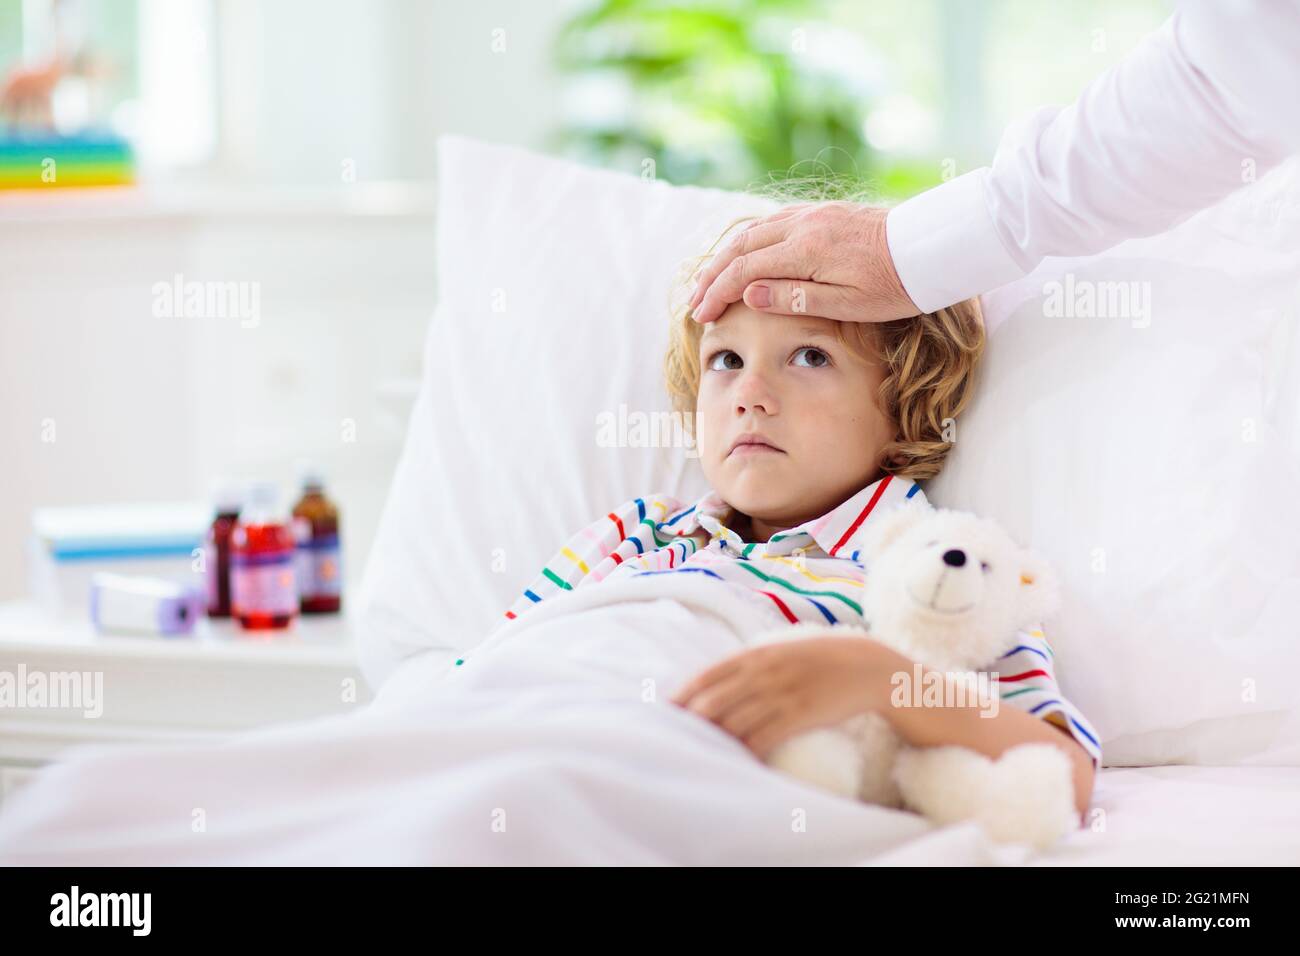 Sick little boy with medicine. Mother checking fever of ill child in bed. Unwell kid with chamber inhaler for asthma cough treatment. Flu season. Stock Photo